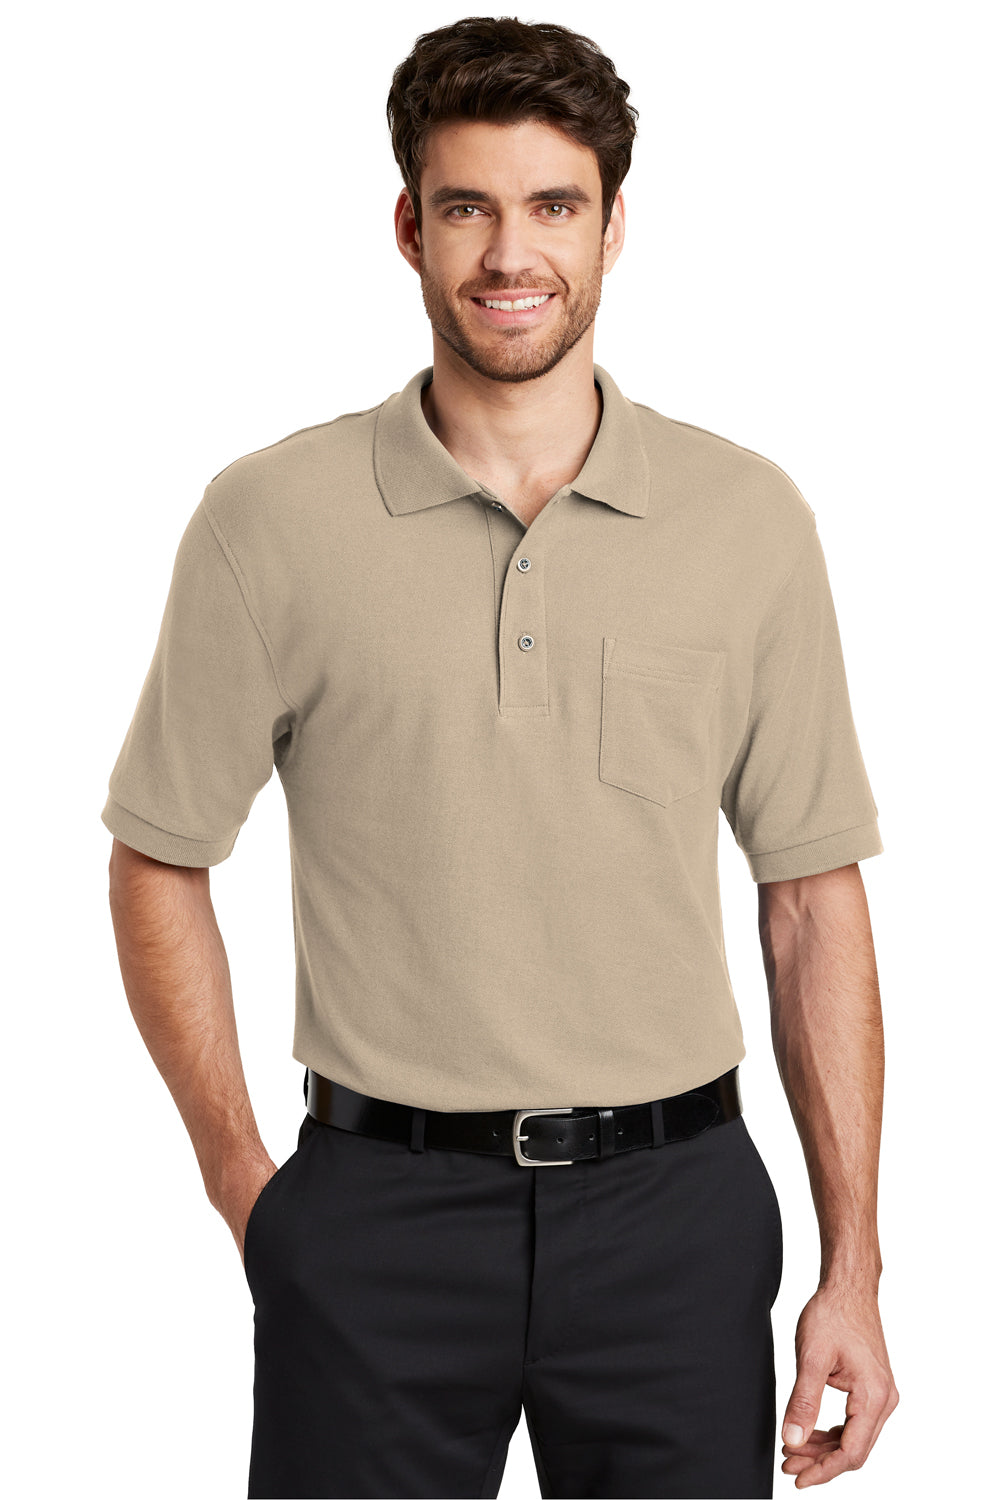 Port Authority K500P Mens Silk Touch Wrinkle Resistant Short Sleeve Polo Shirt w/ Pocket Stone Brown Front